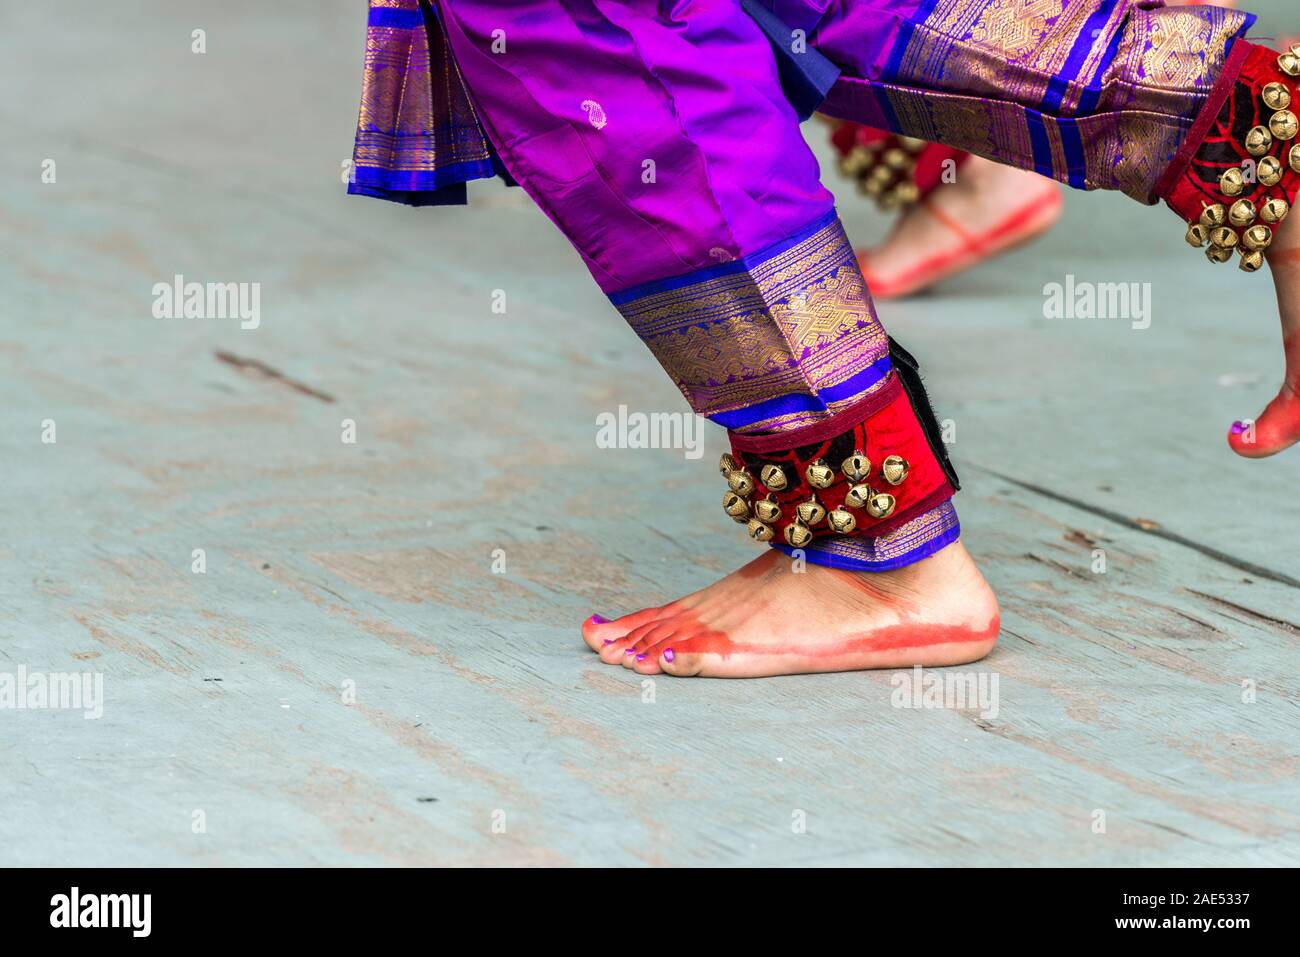 A festival dance during a Canada Day event. Sounds and motions of an Indian dance routine Stock Photo